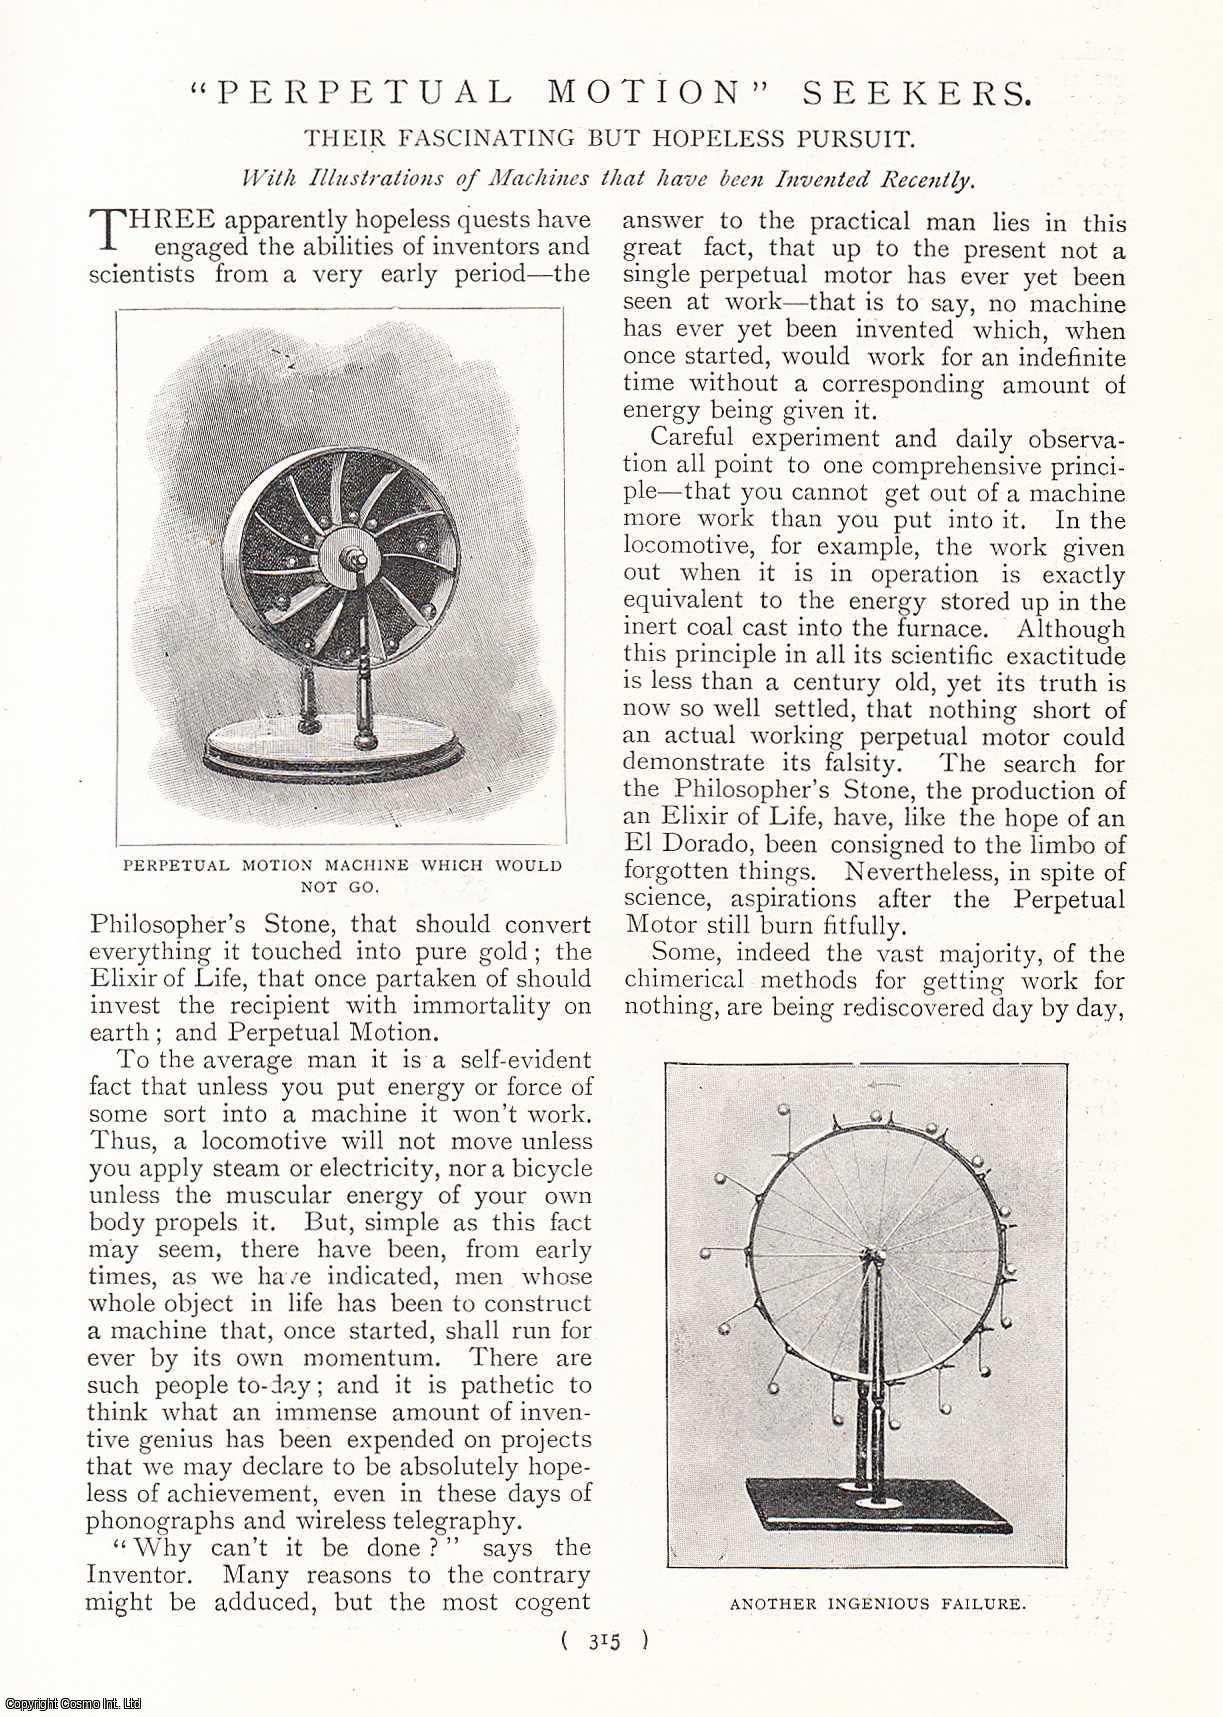 No Author Stated - The Grindstone Paradox ; Concertina Machine ; Water Motor Car ; A Capillary Motor & others : Perpetual Motion Seekers. Their Fascinating But Hopeless Pursuit. With Illustrations of Machines That Have Been Invented Recently. An uncommon original article from the Harmsworth London Magazine, 1898.